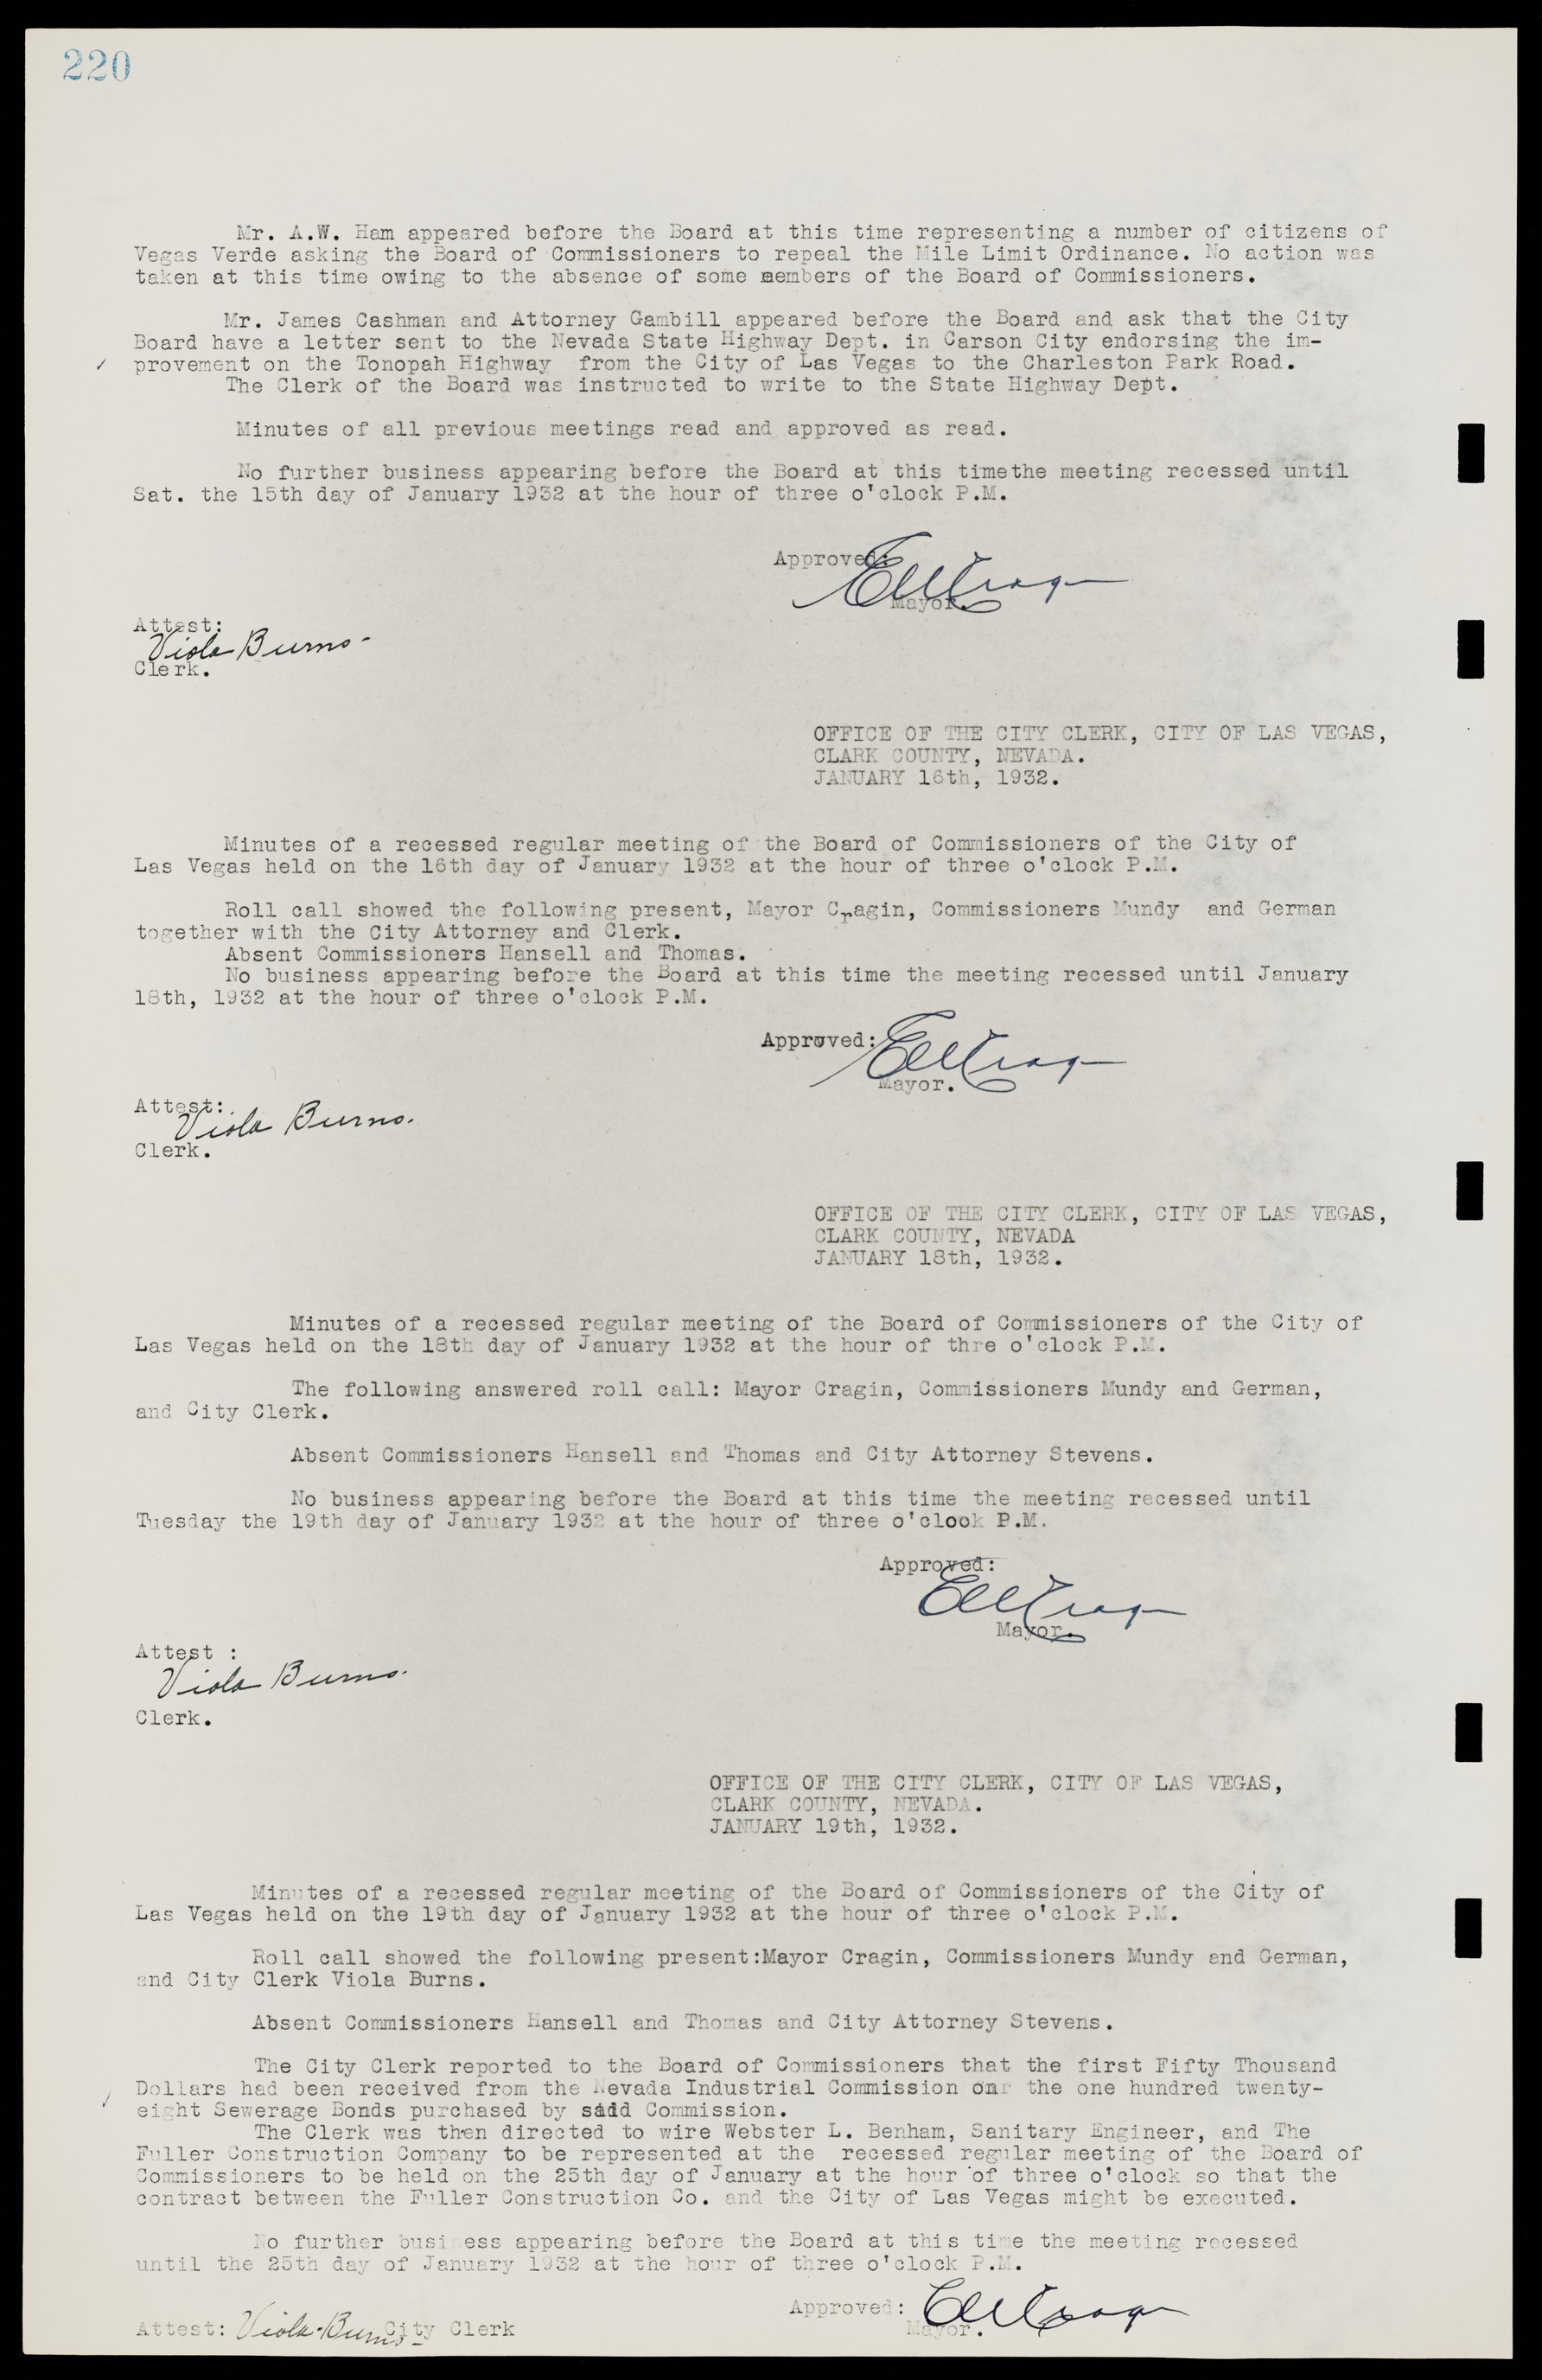 Las Vegas City Commission Minutes, May 14, 1929 to February 11, 1937, lvc000003-226